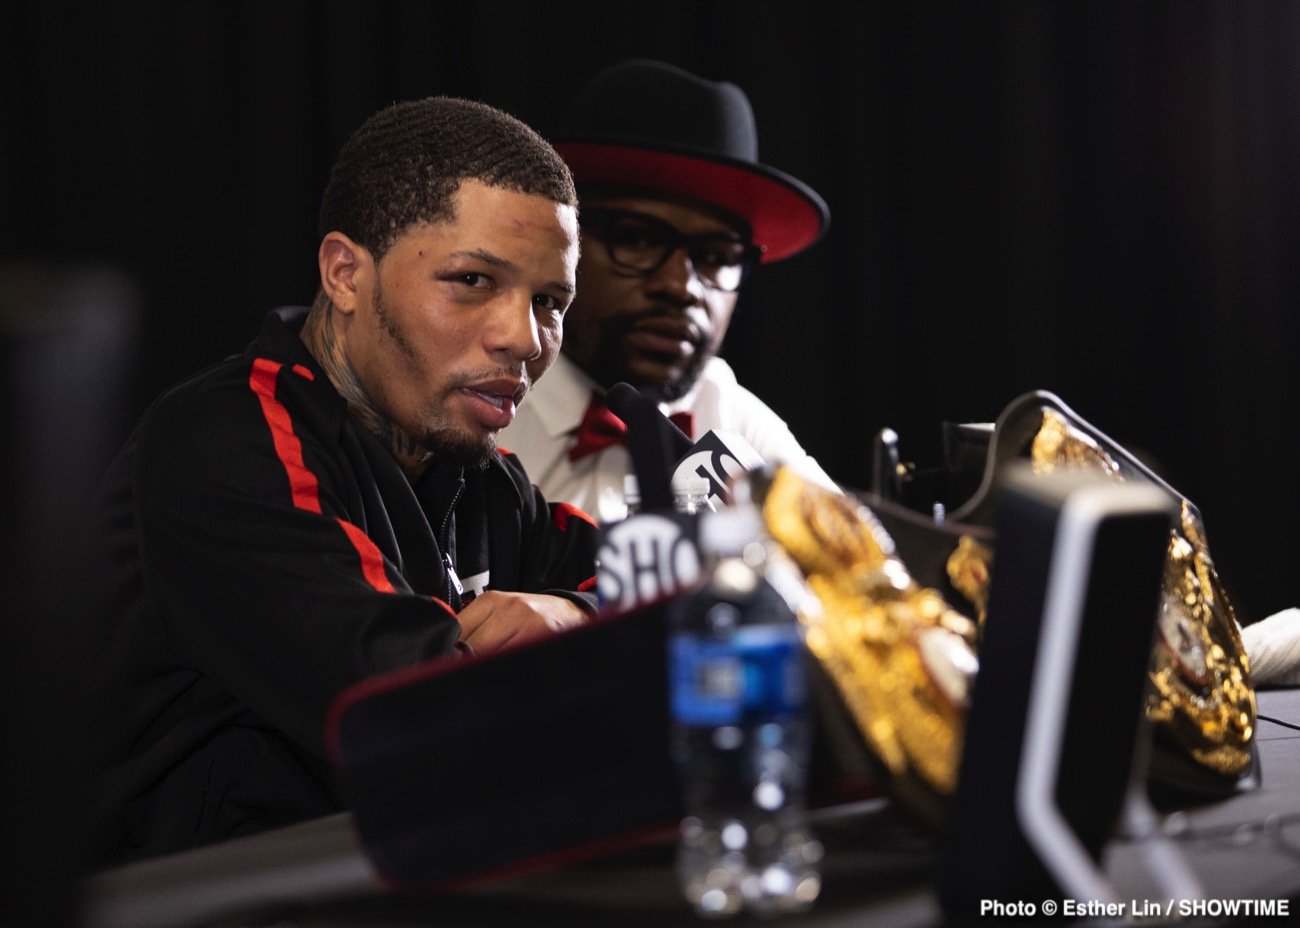 Image: Gervonta Davis to stay at 140 after Mario Barrios fight, wants Ramirez vs. Taylor winner